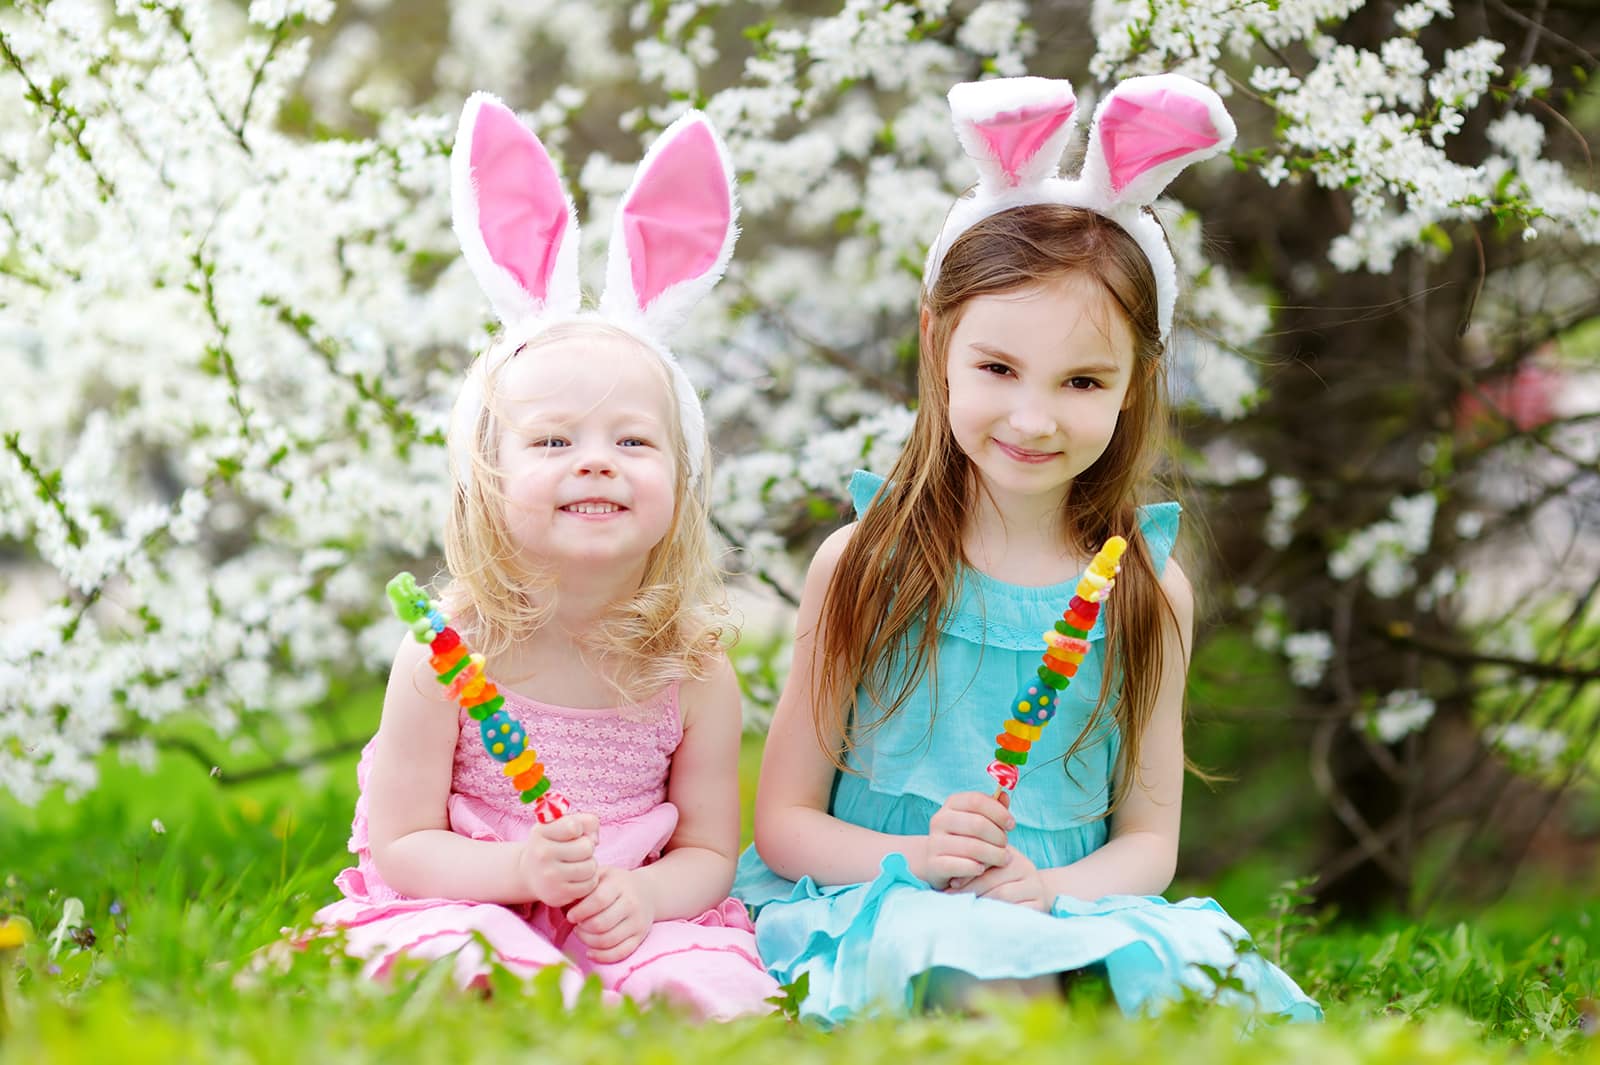 Featured image for “Ask Your Corpus Christi Dentist: How to Choose Easter Candy for Better Dental Health”